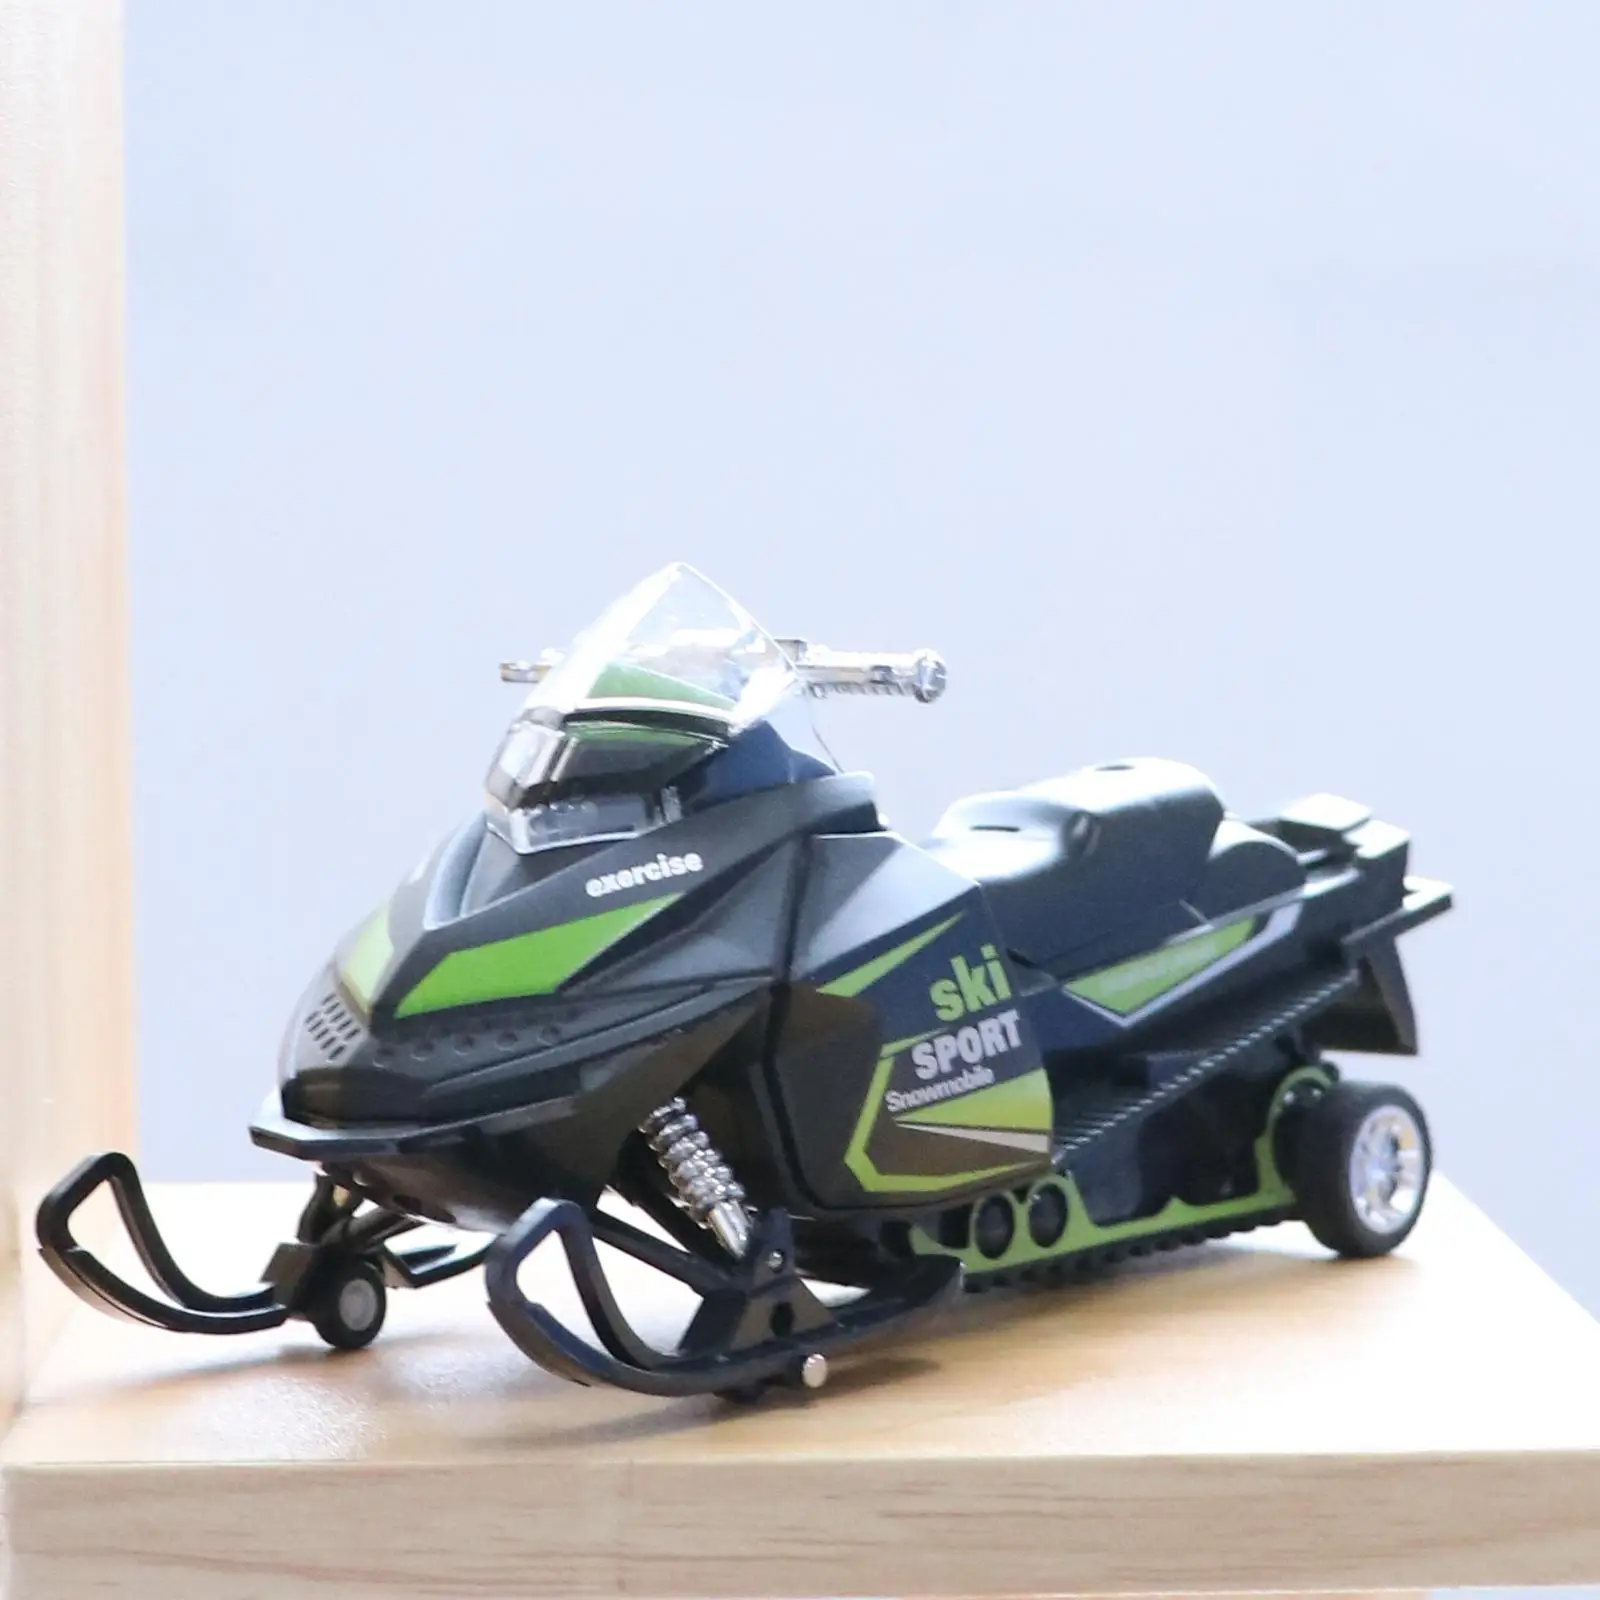 Collectible Snowmobile Motorcycle Pullback Car Model with Lights And Sounds